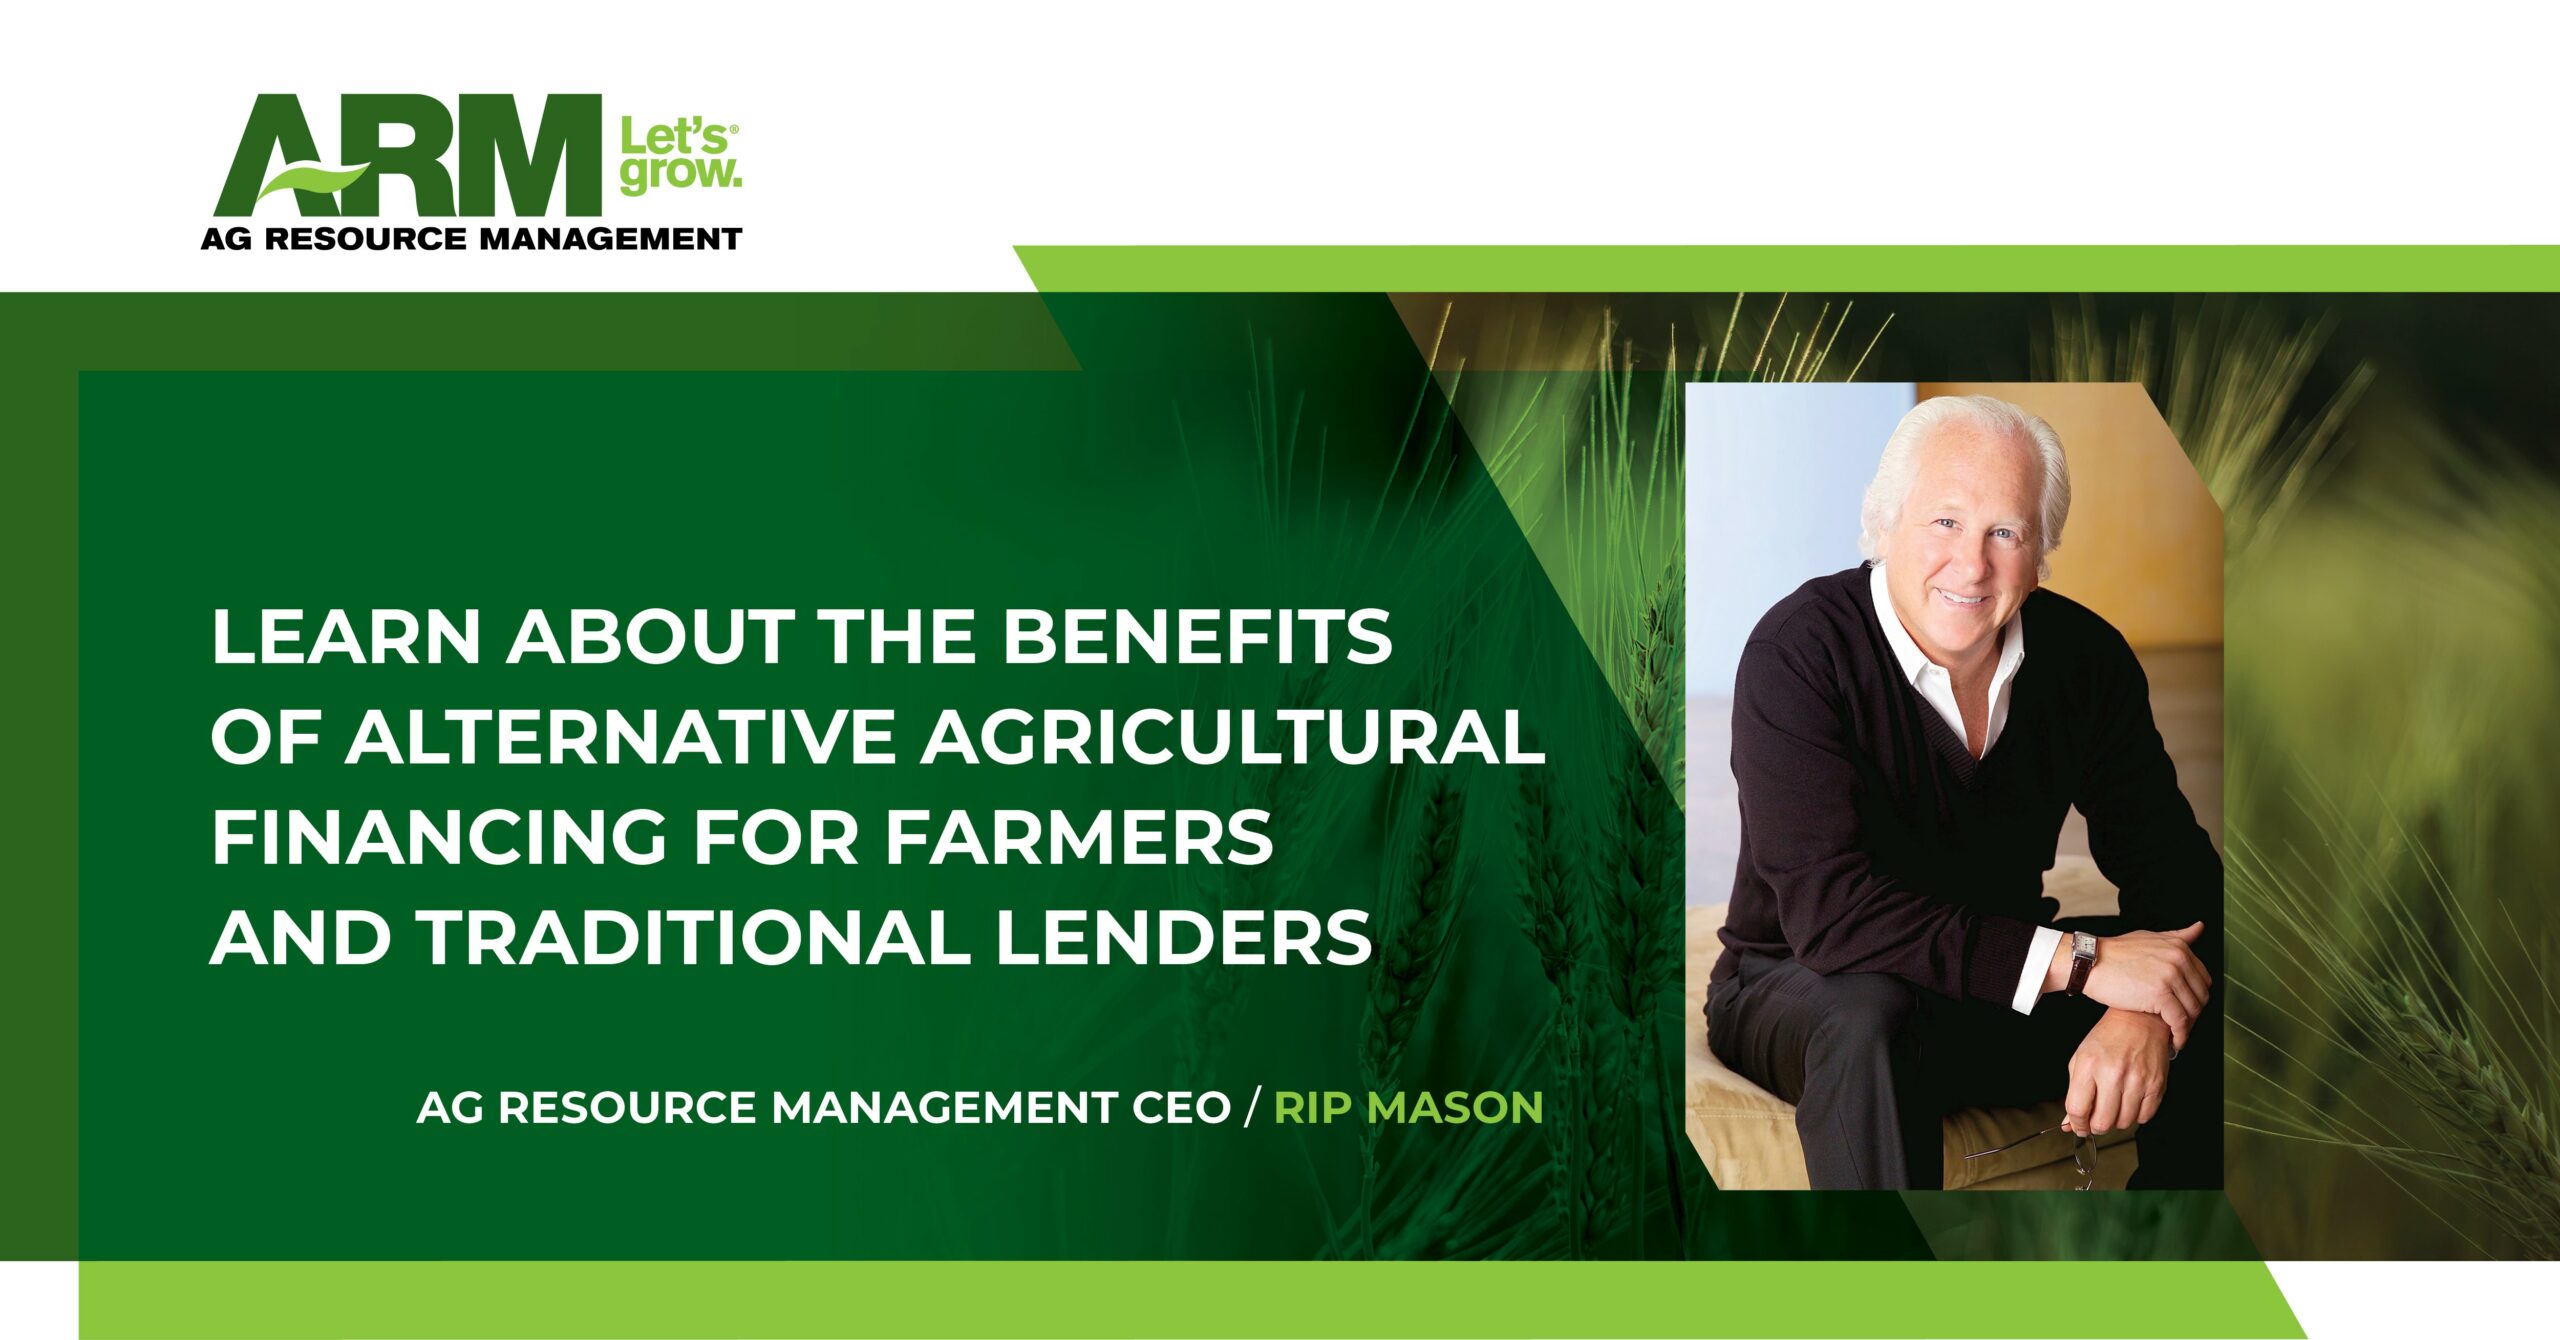 Learn about the benefits of alternative agricultural financing for farmers and traditional lenders